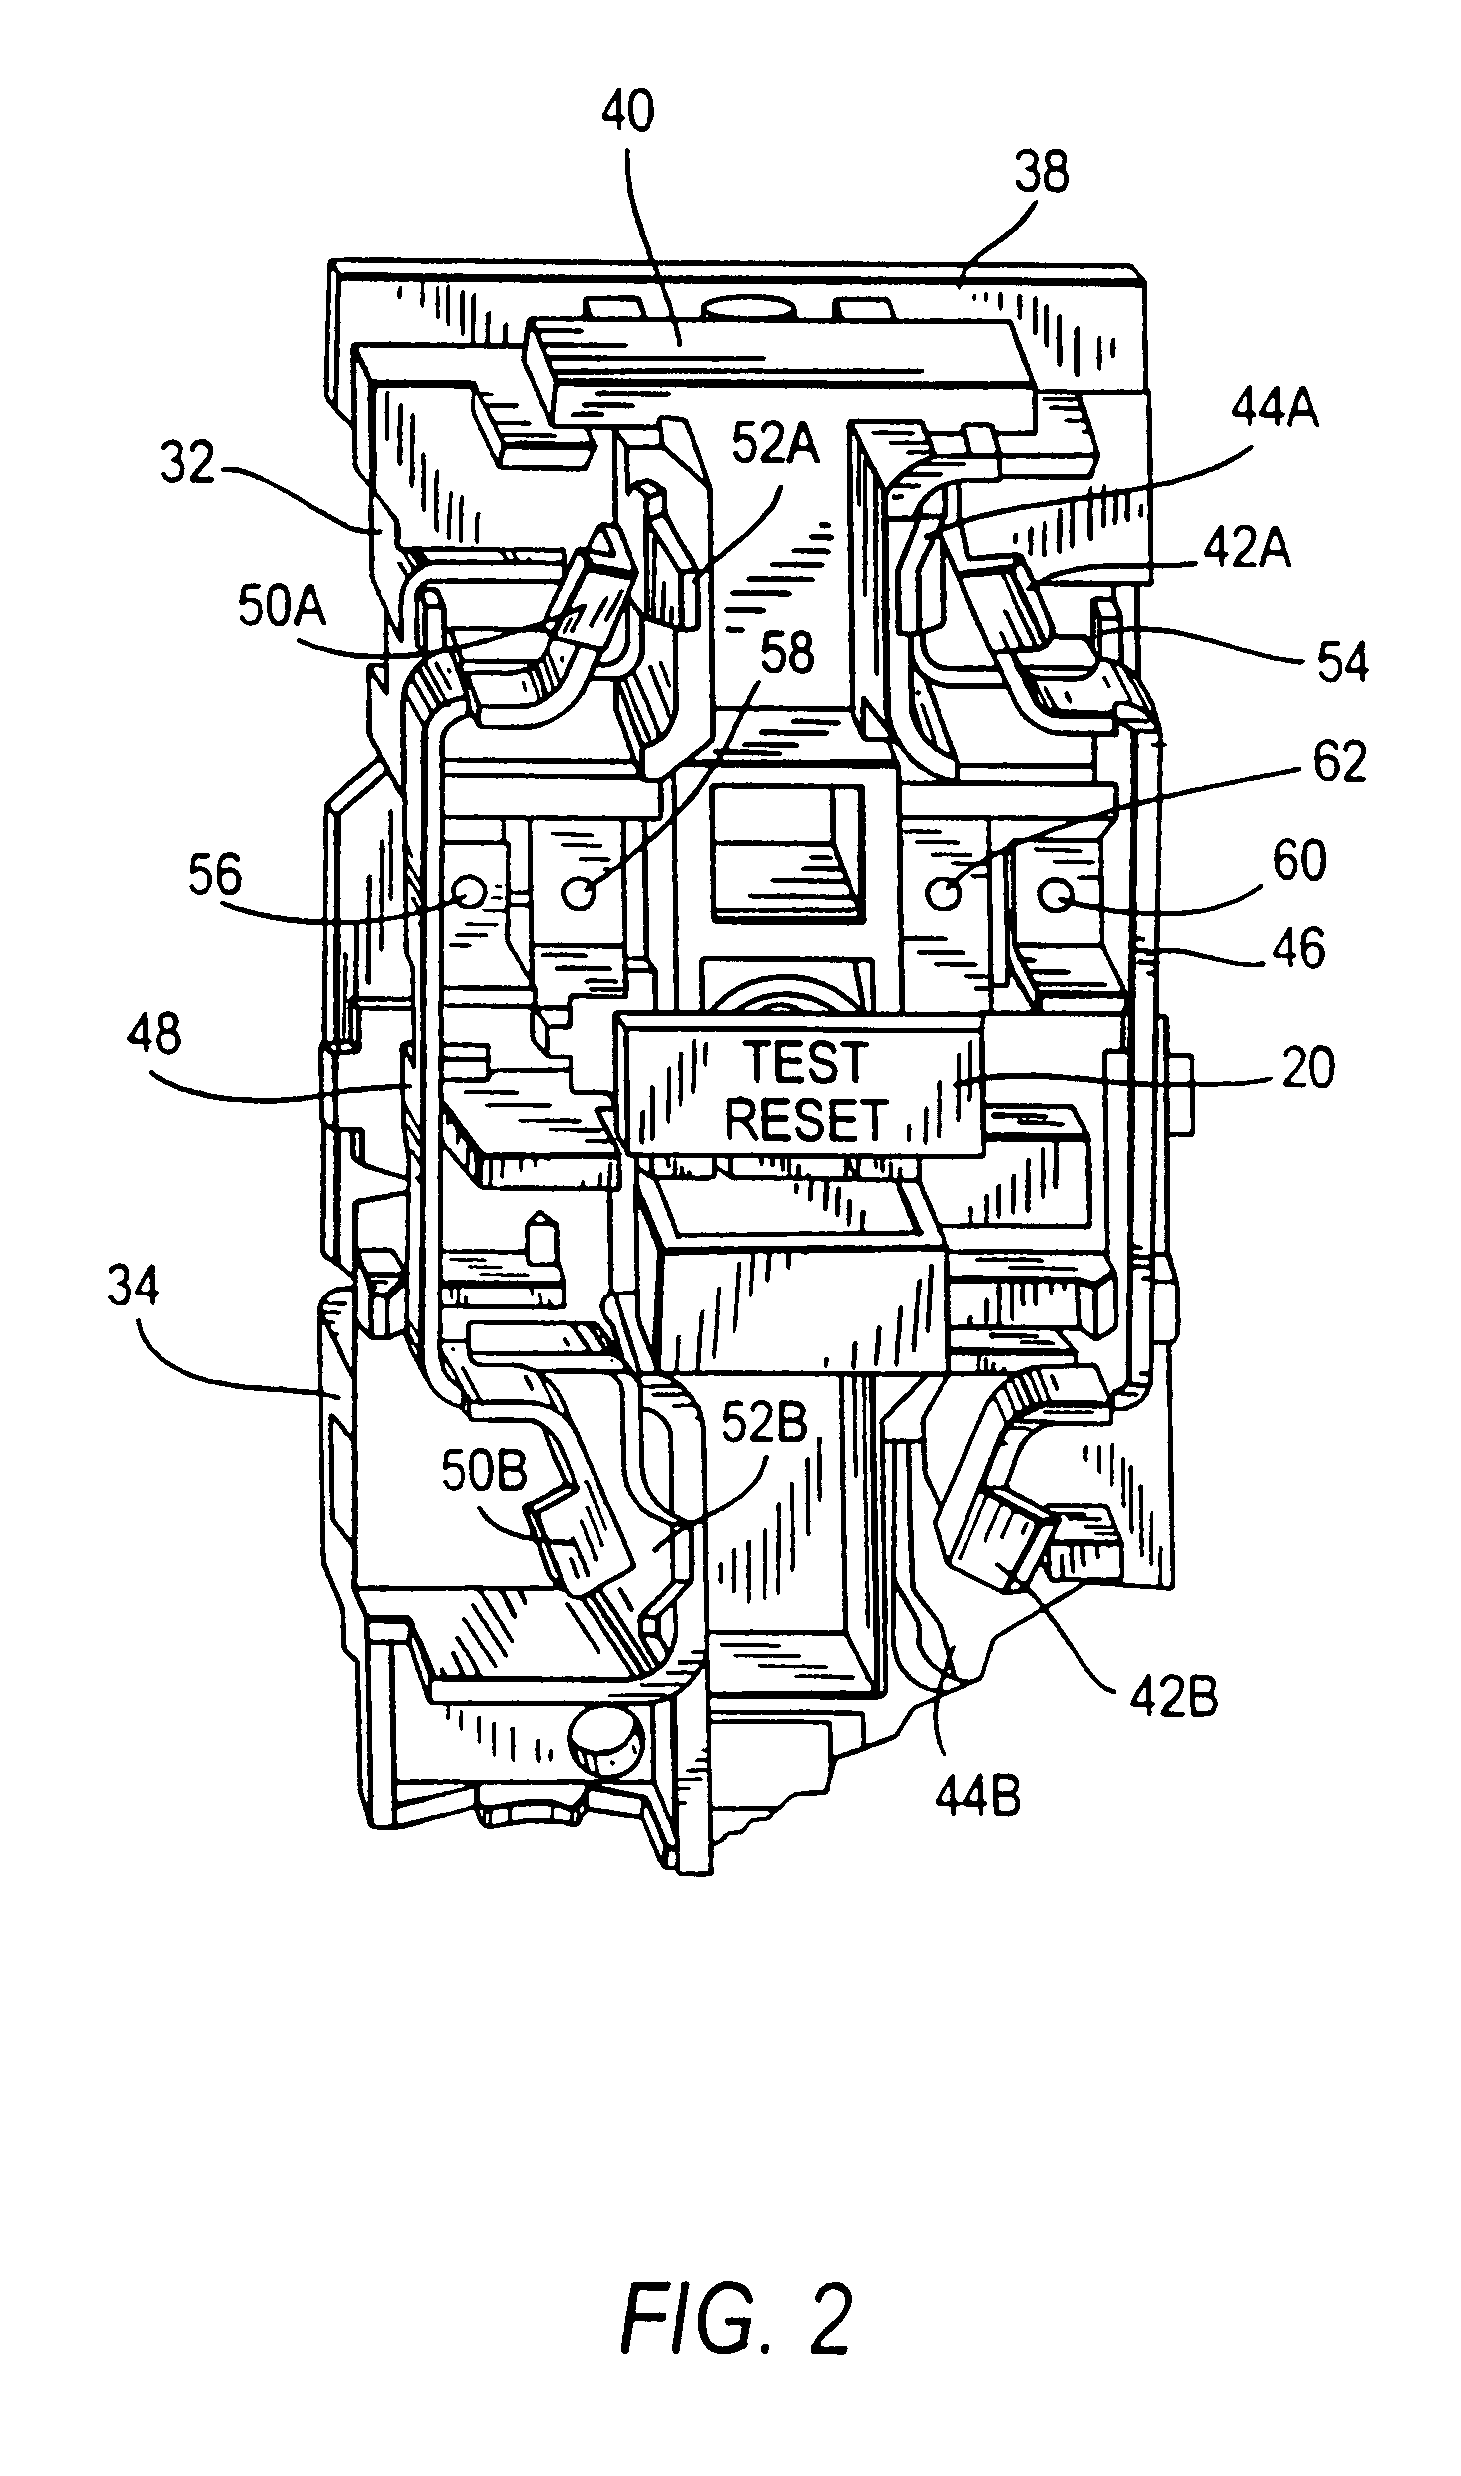 Circuit interrupting device with a single test-reset button